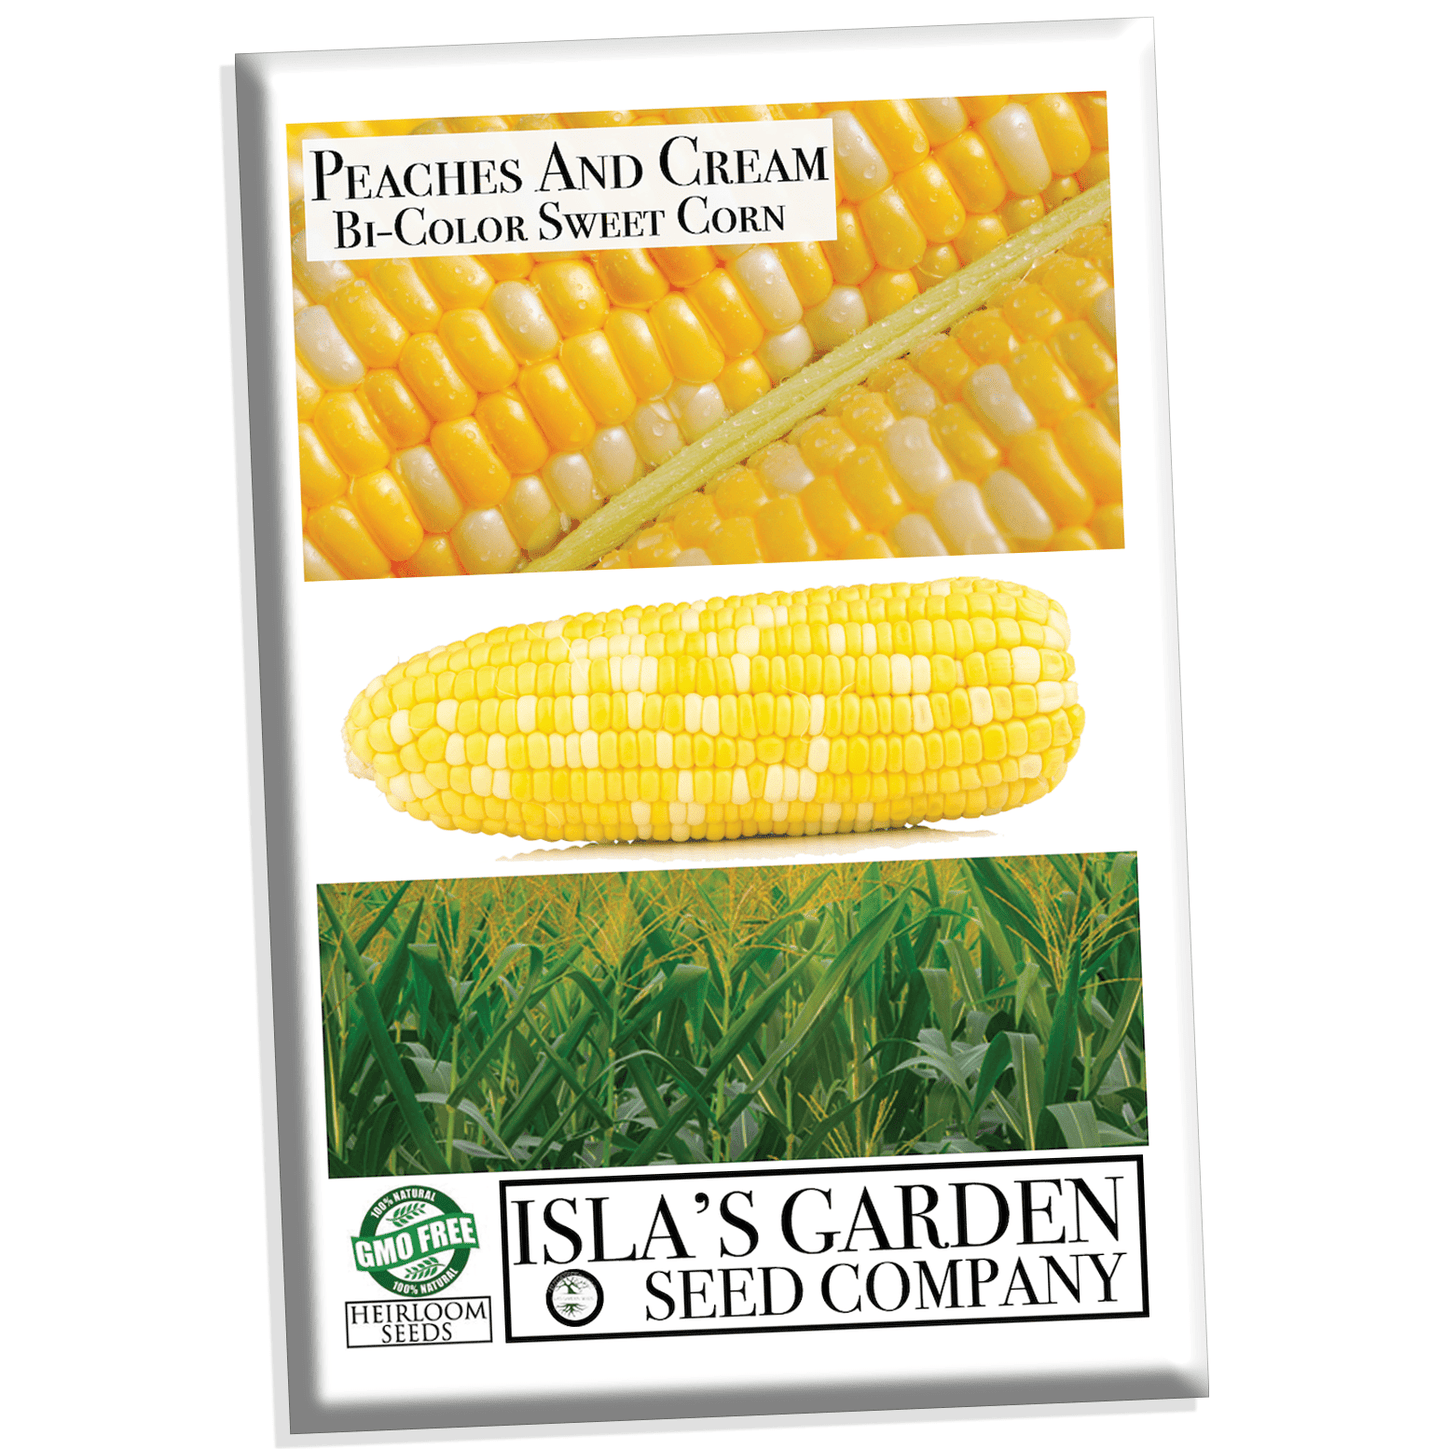 "Peaches and Cream" Bi-Color Sweet Corn Seeds for Planting, 25+ Heirloom Seeds Per Packet, Non GMO Seeds, Botanical Name: Zea Mays